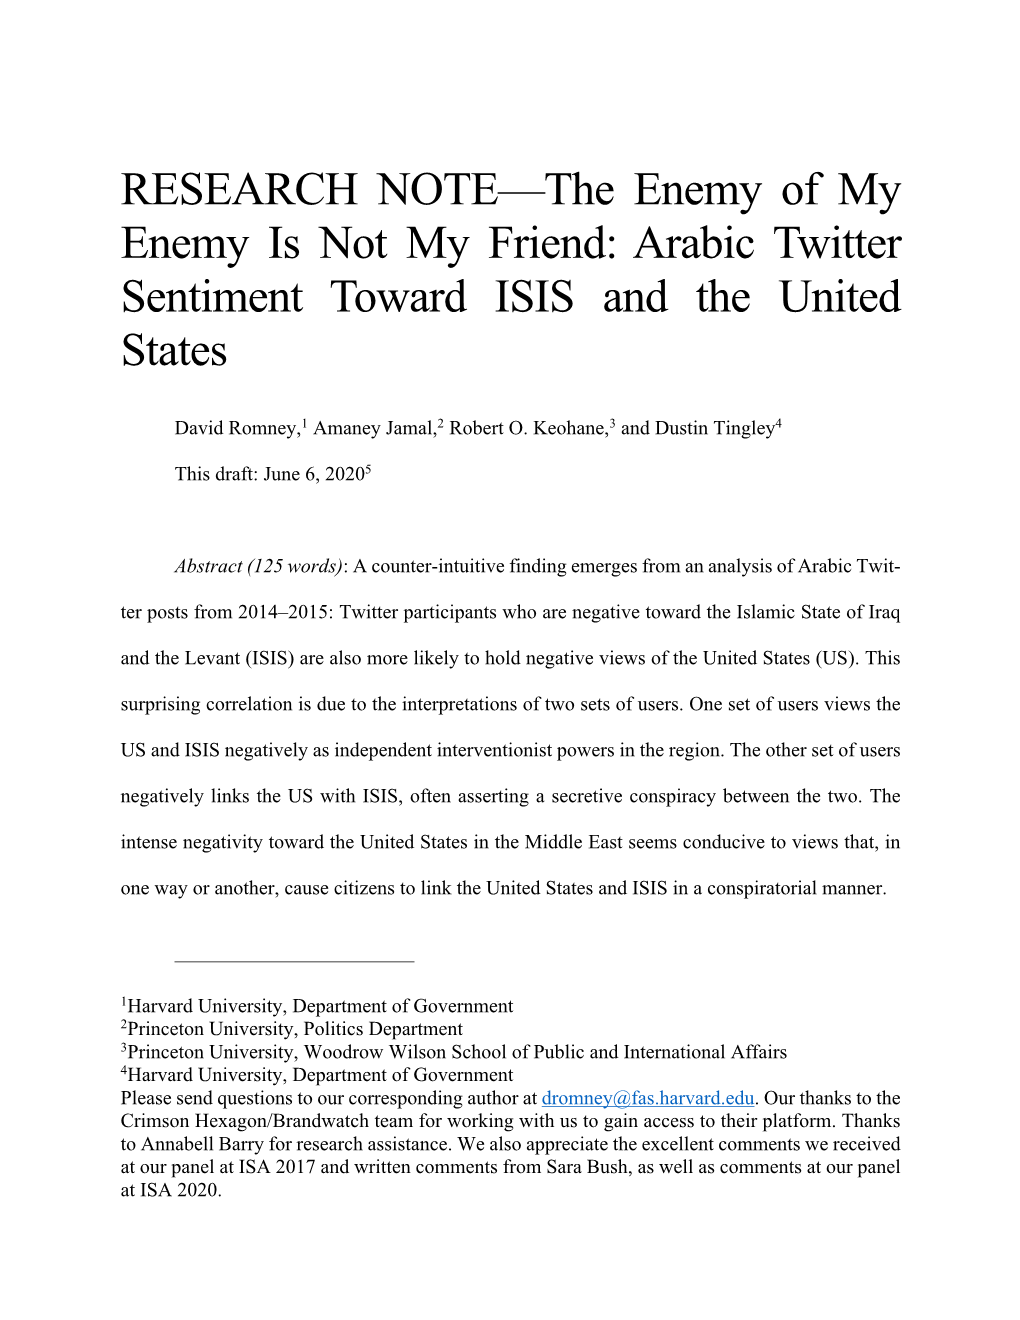 Arabic Twitter Sentiment Toward ISIS and the United States